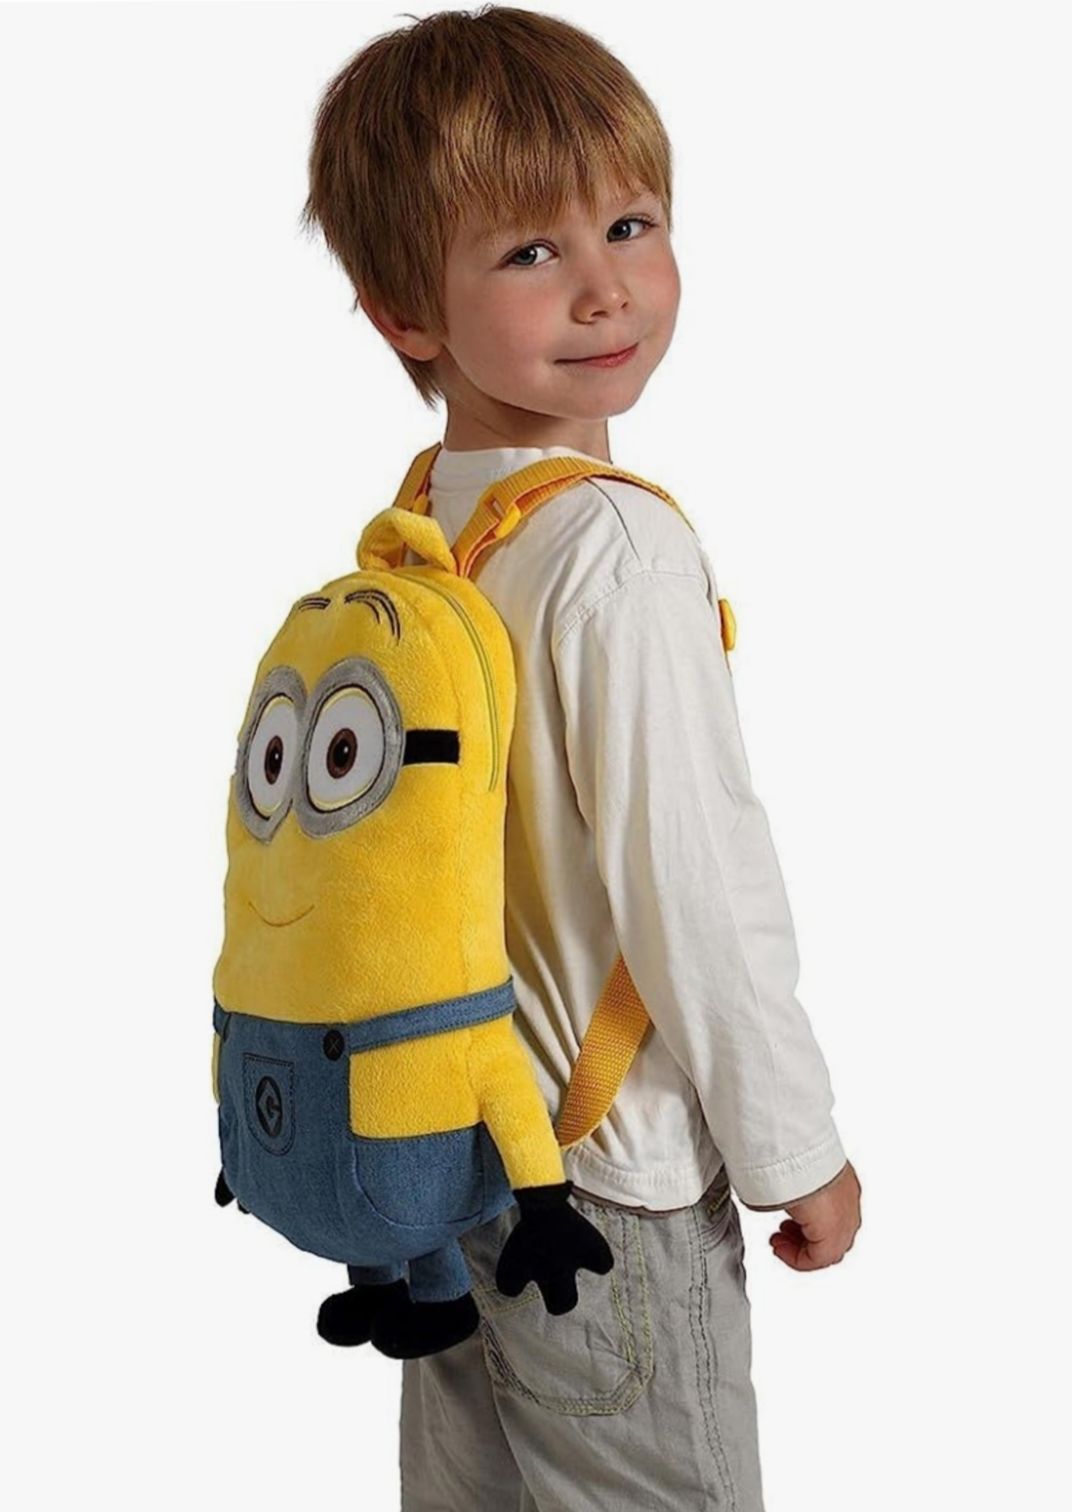 Despicable Me Minion Plush Backpack, admittedly does